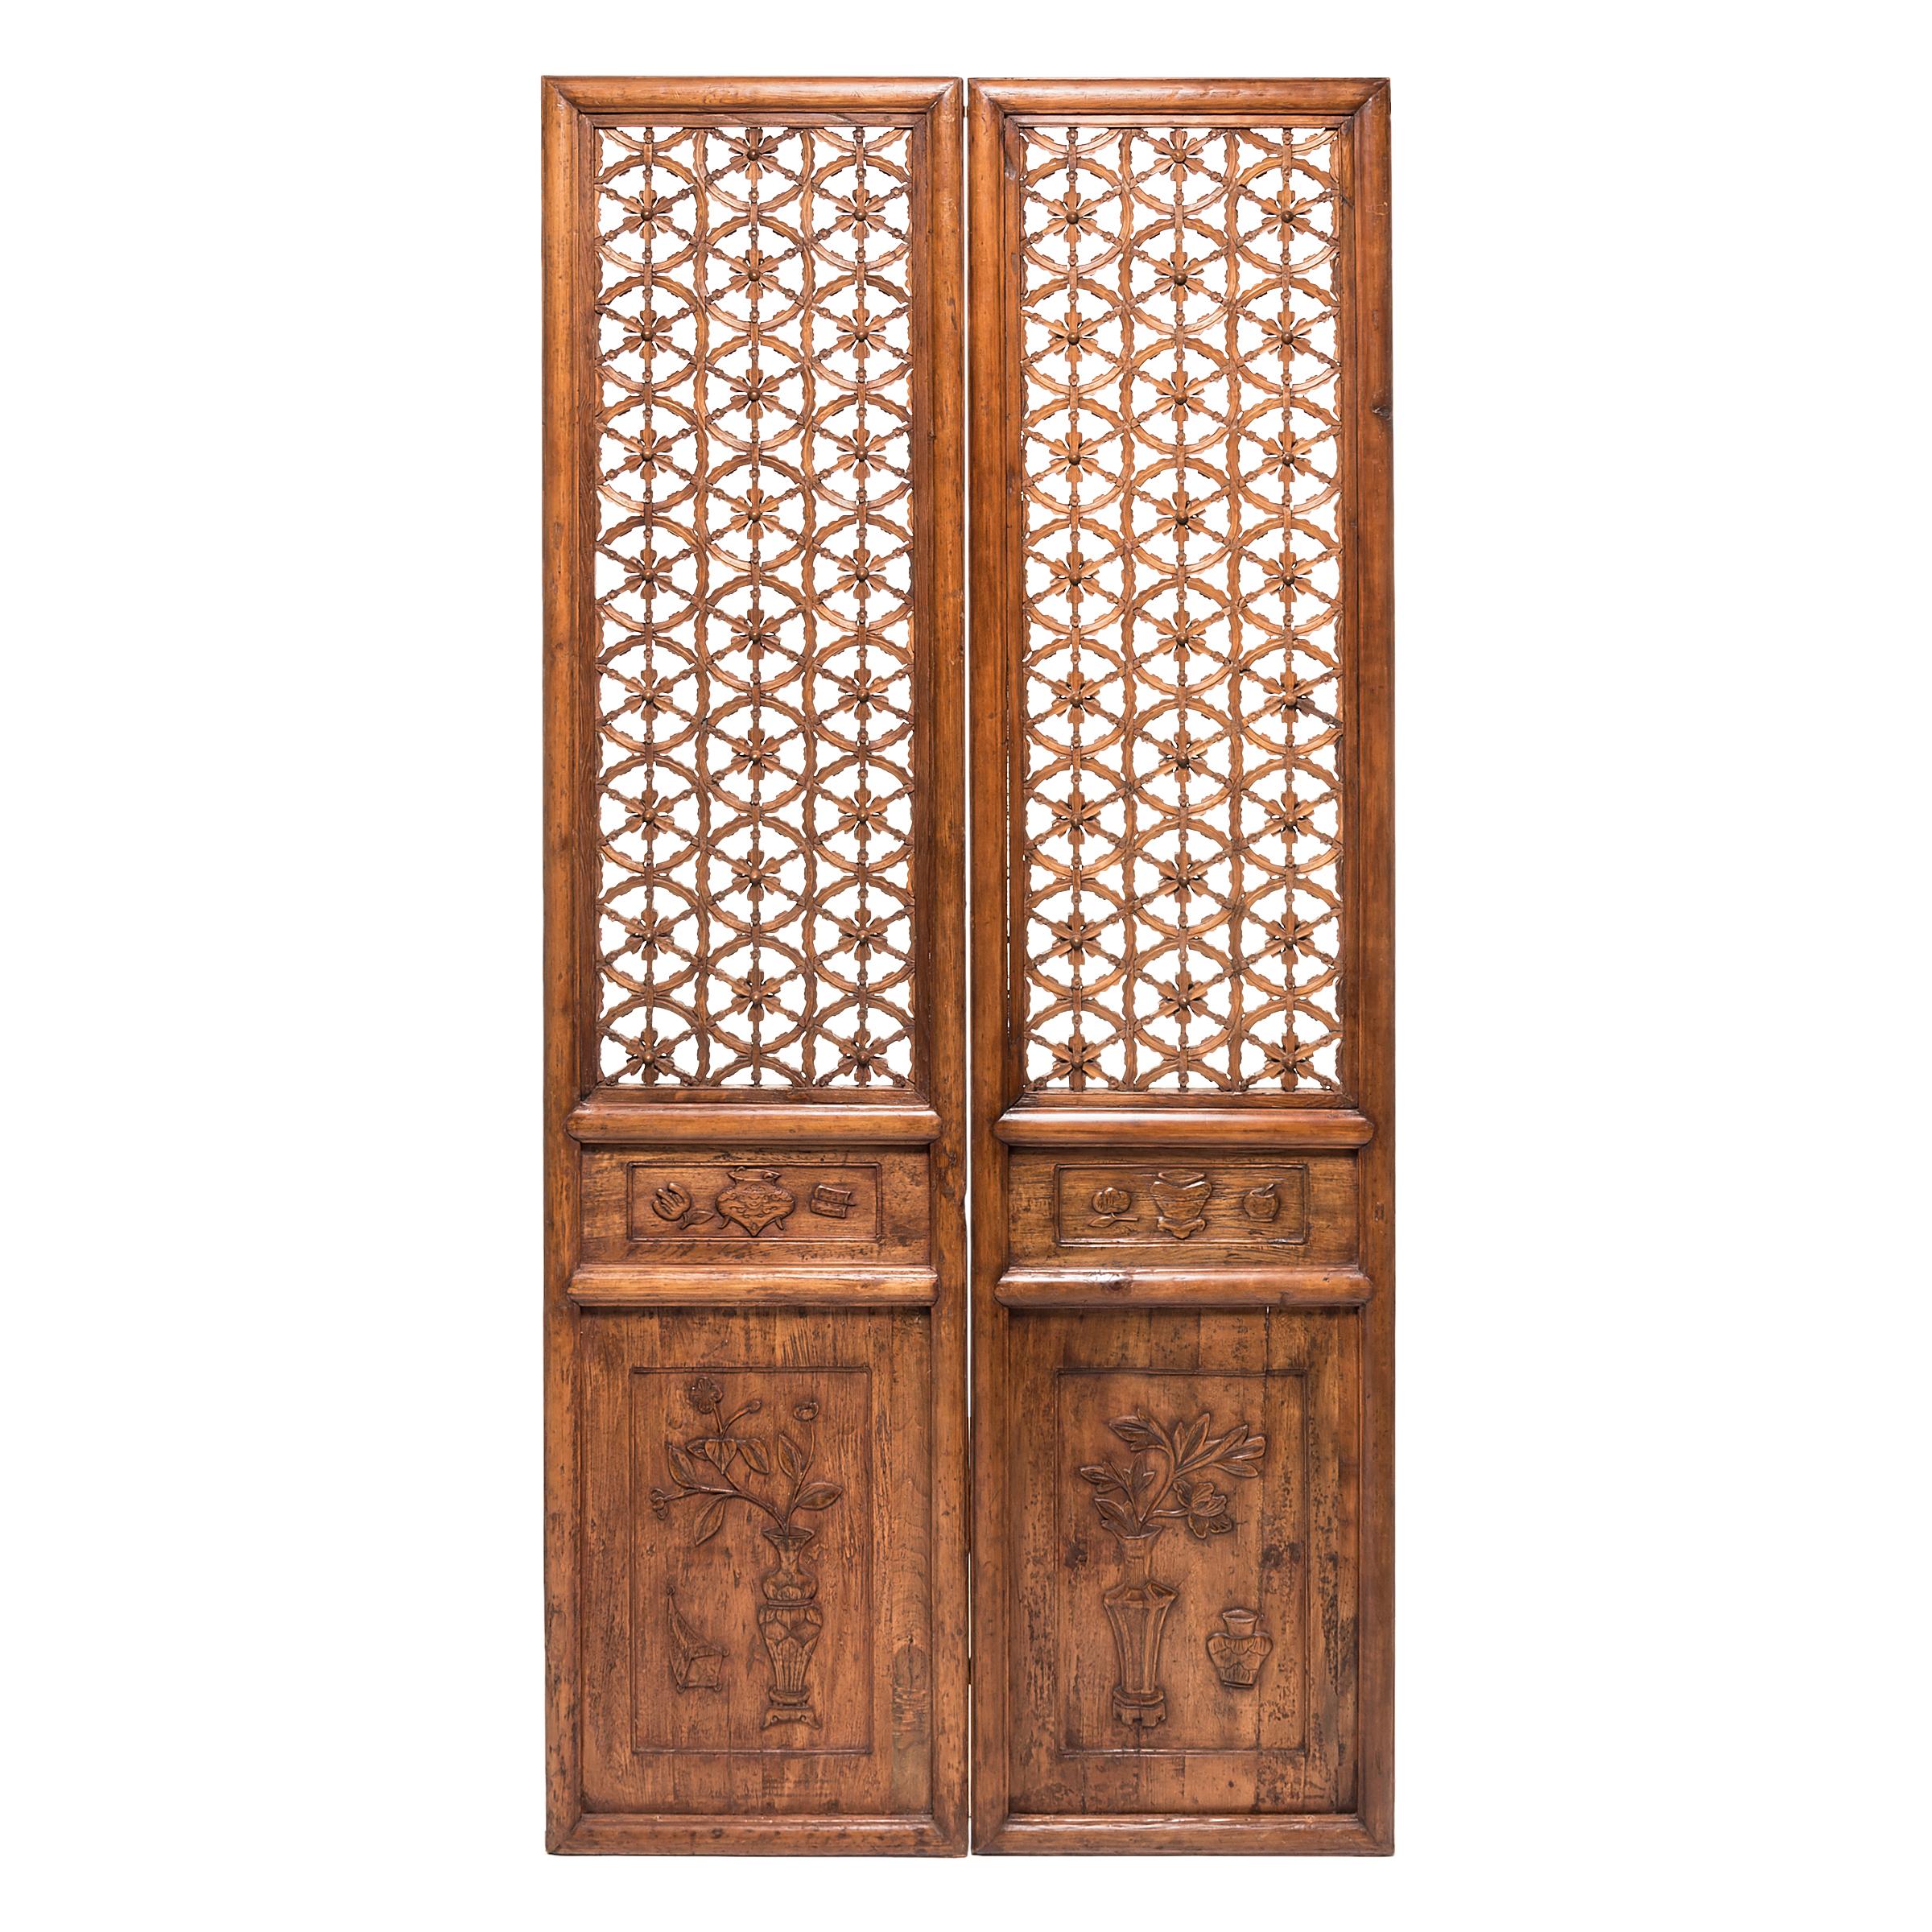 Hand-Carved Set of Four 18th Century Chinese Floral Lattice Courtyard Panels